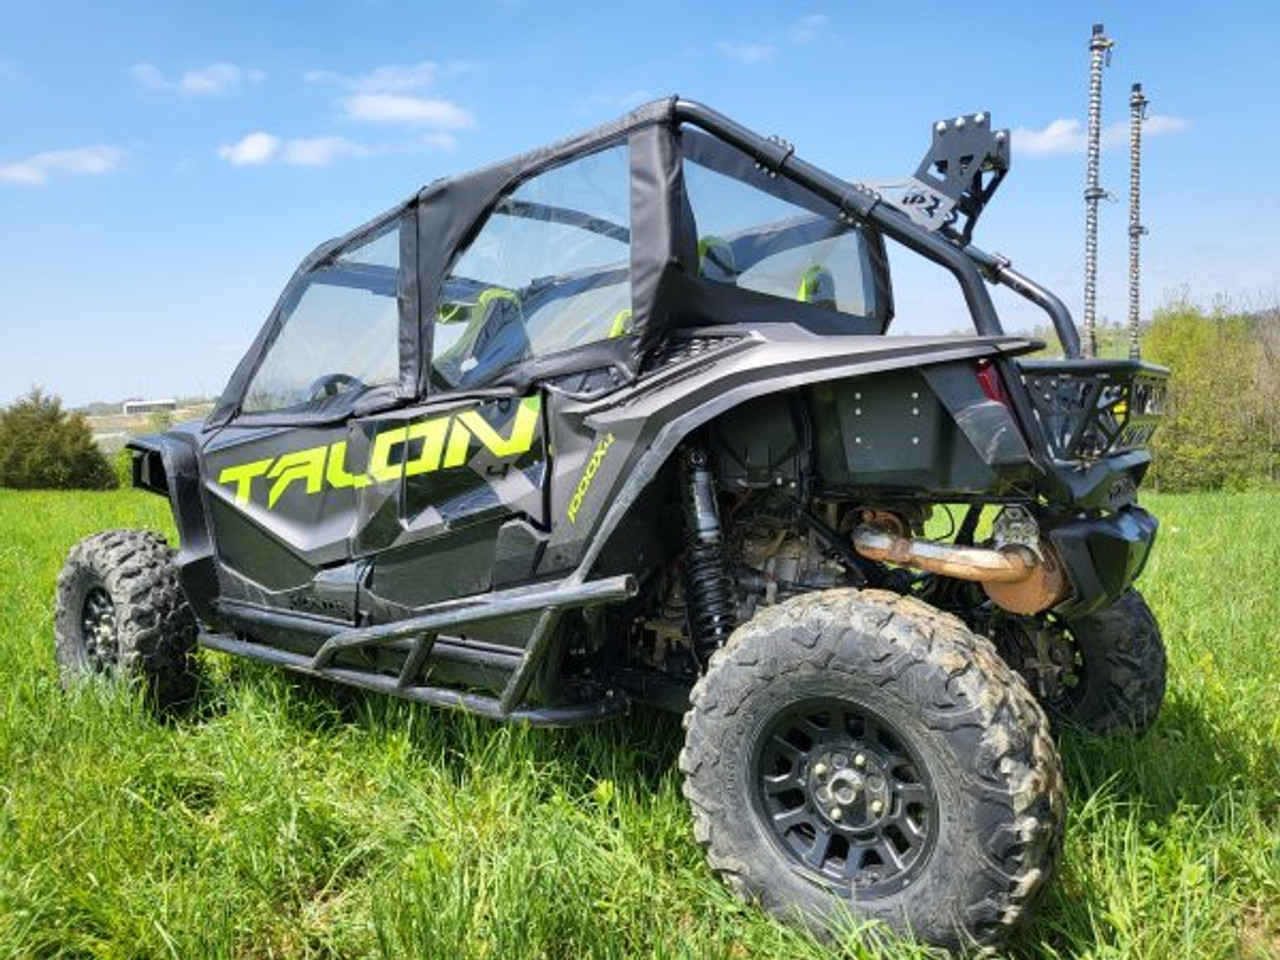 3 Star side x side Honda Talon 1000-4 upper doors and rear window side and rear angle view